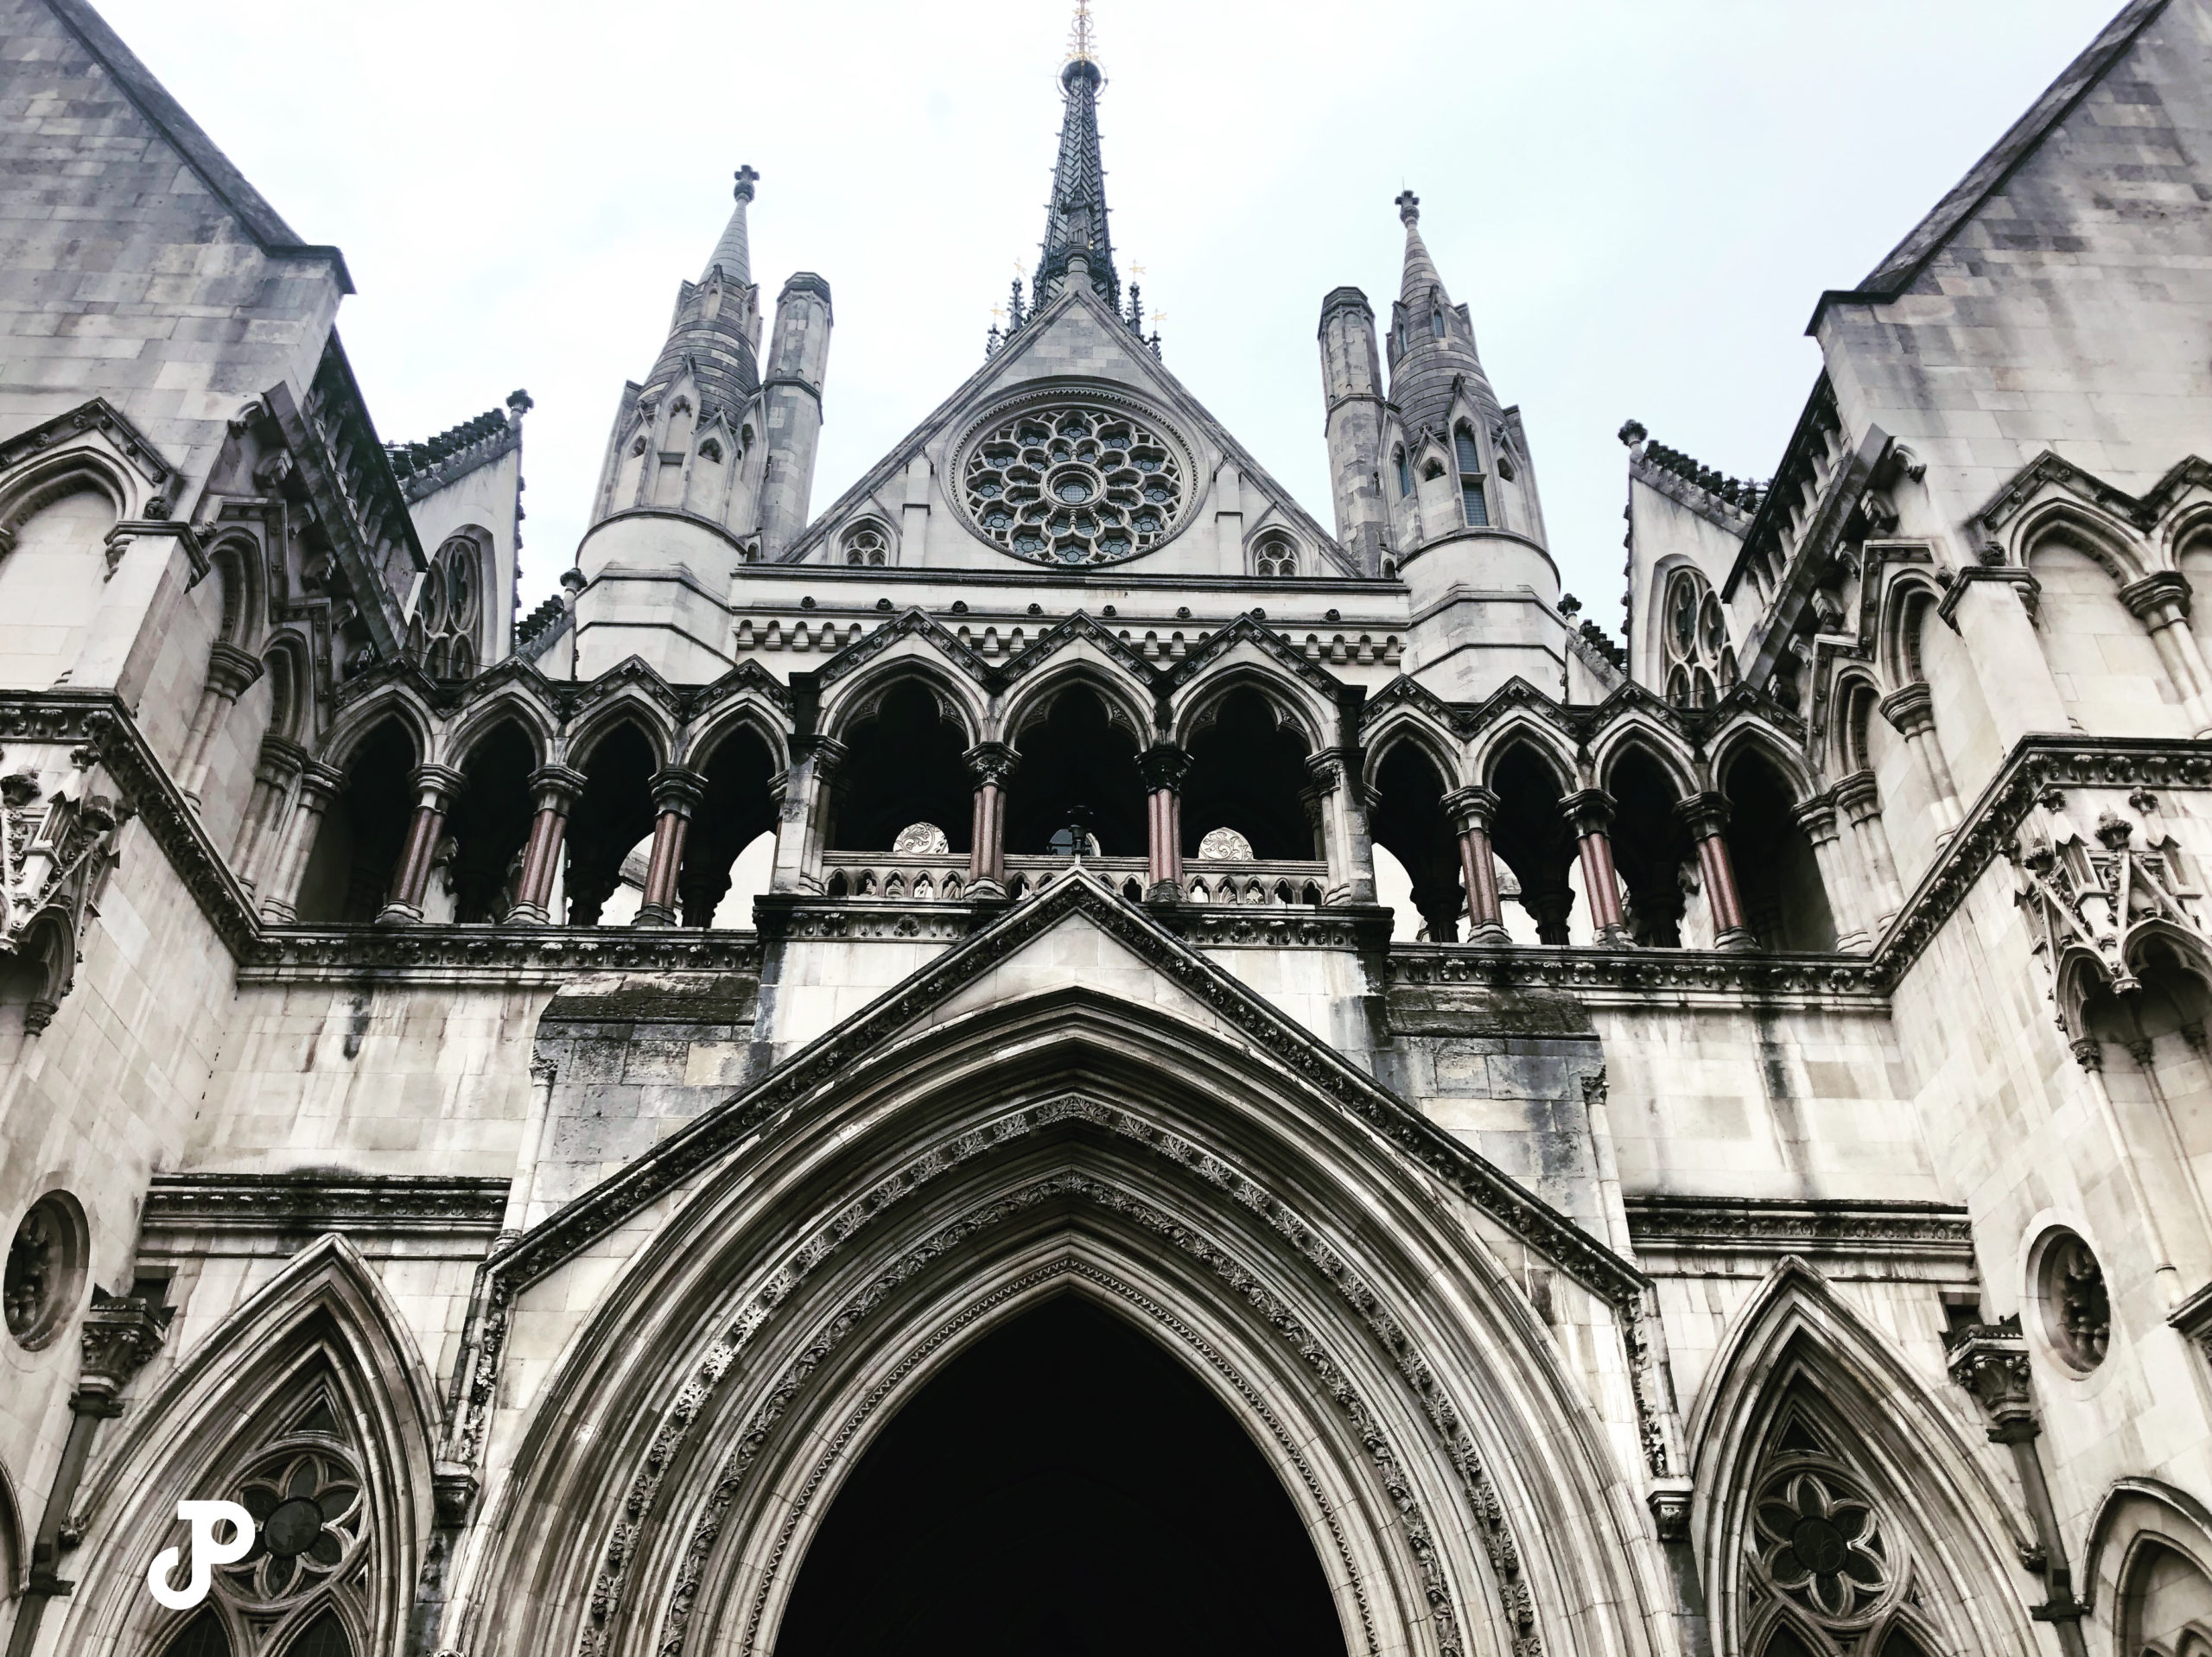 the Royal Courts of Justice in London